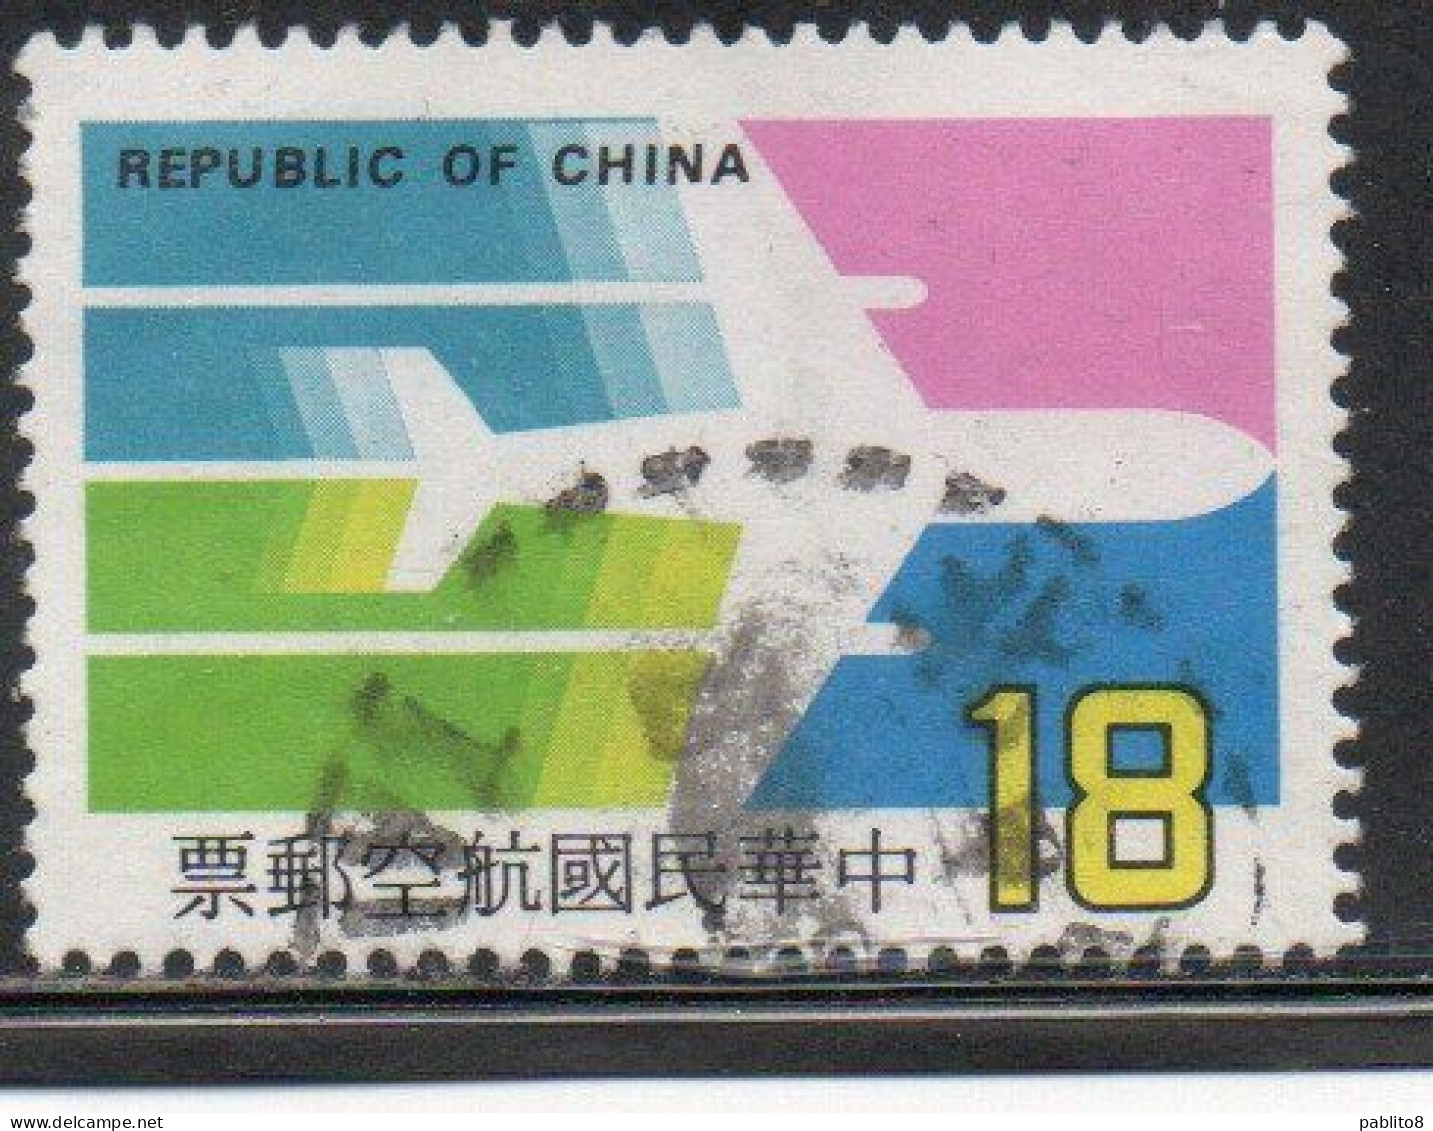 CHINA REPUBLIC CINA TAIWAN FORMOSA 1987 AIR POST MAIL AIRMAIL AIRPLANE 18$ USED USATO OBLITERE' - Poste Aérienne